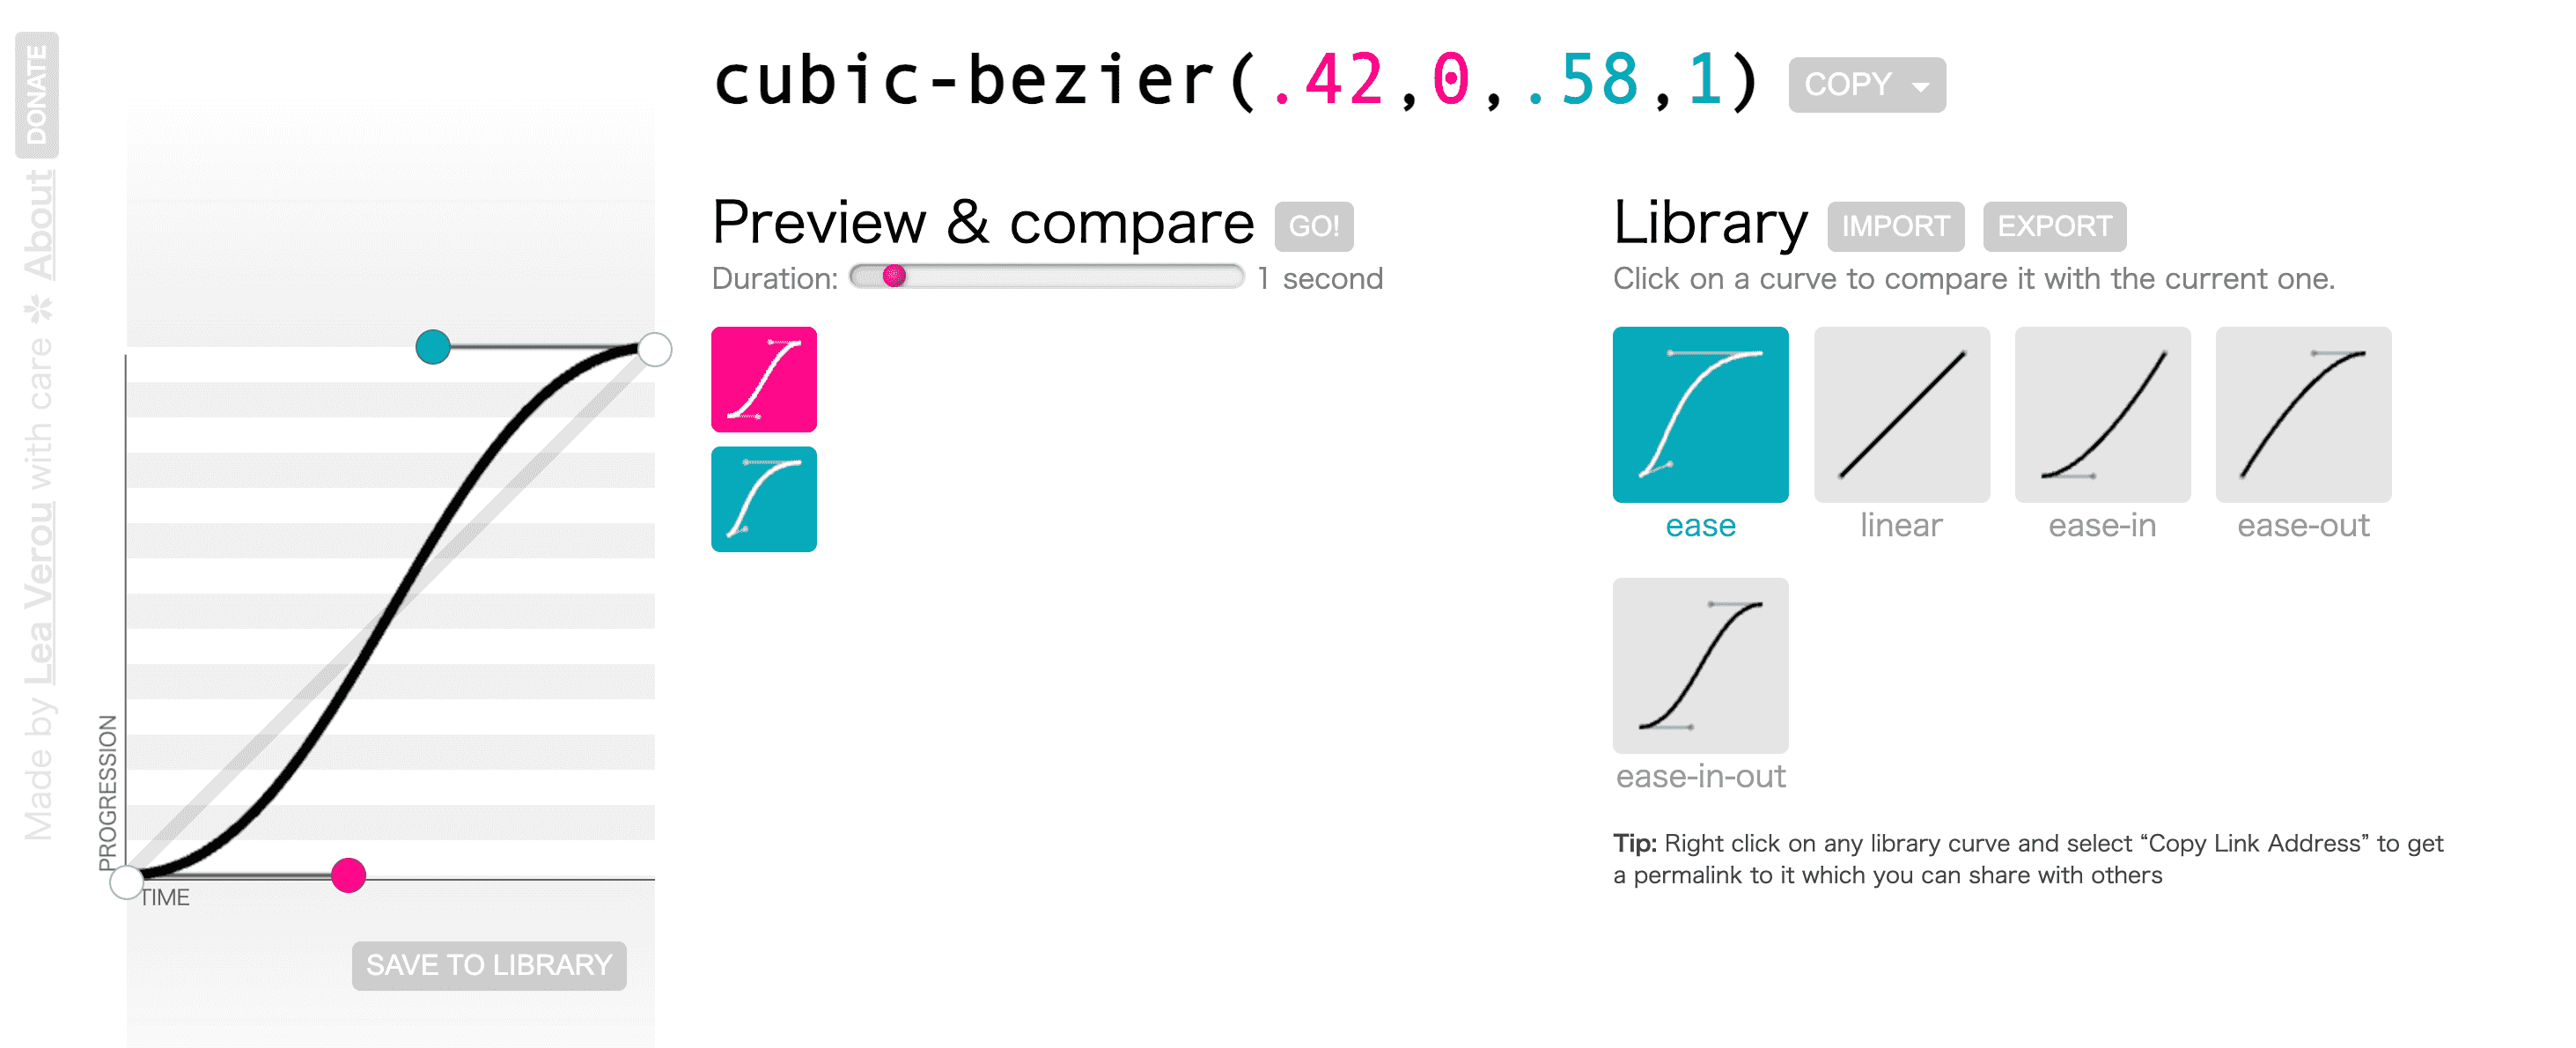 transition ease in out cubic bezier curve